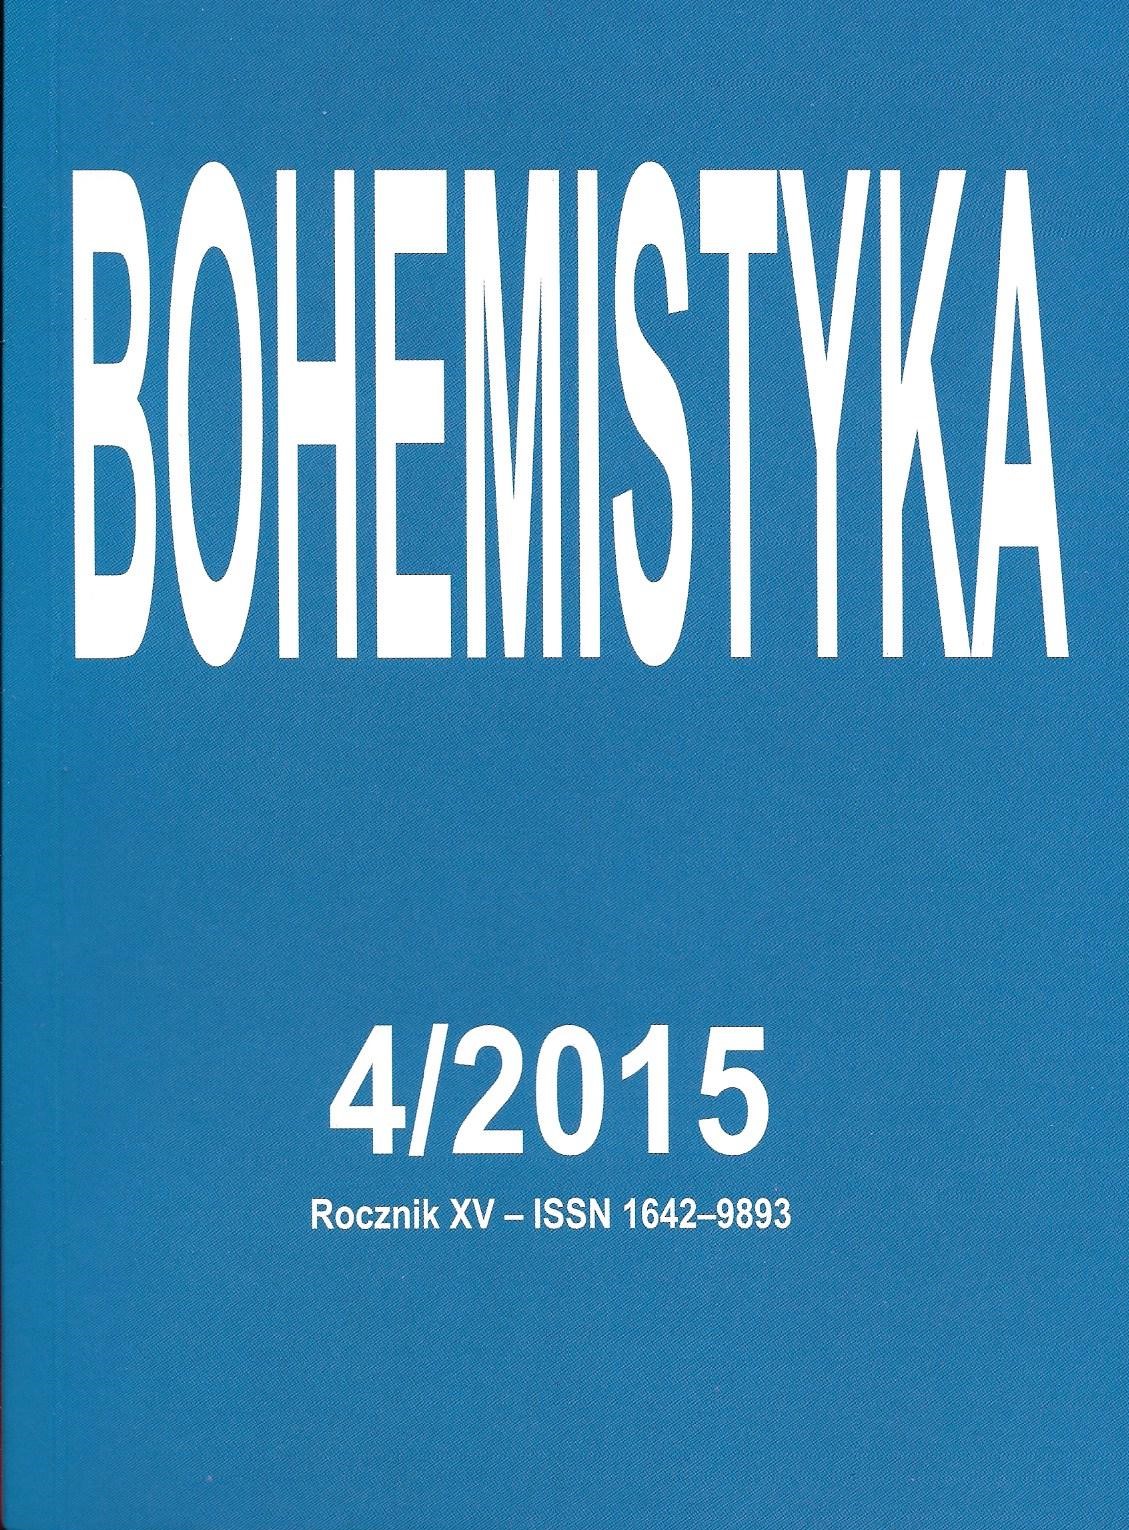 60 years of Bohemistic Studies. Czech-Hungary cultural contacts, creation of Slavic and Bohemistic Studies on the University of Budapest Cover Image